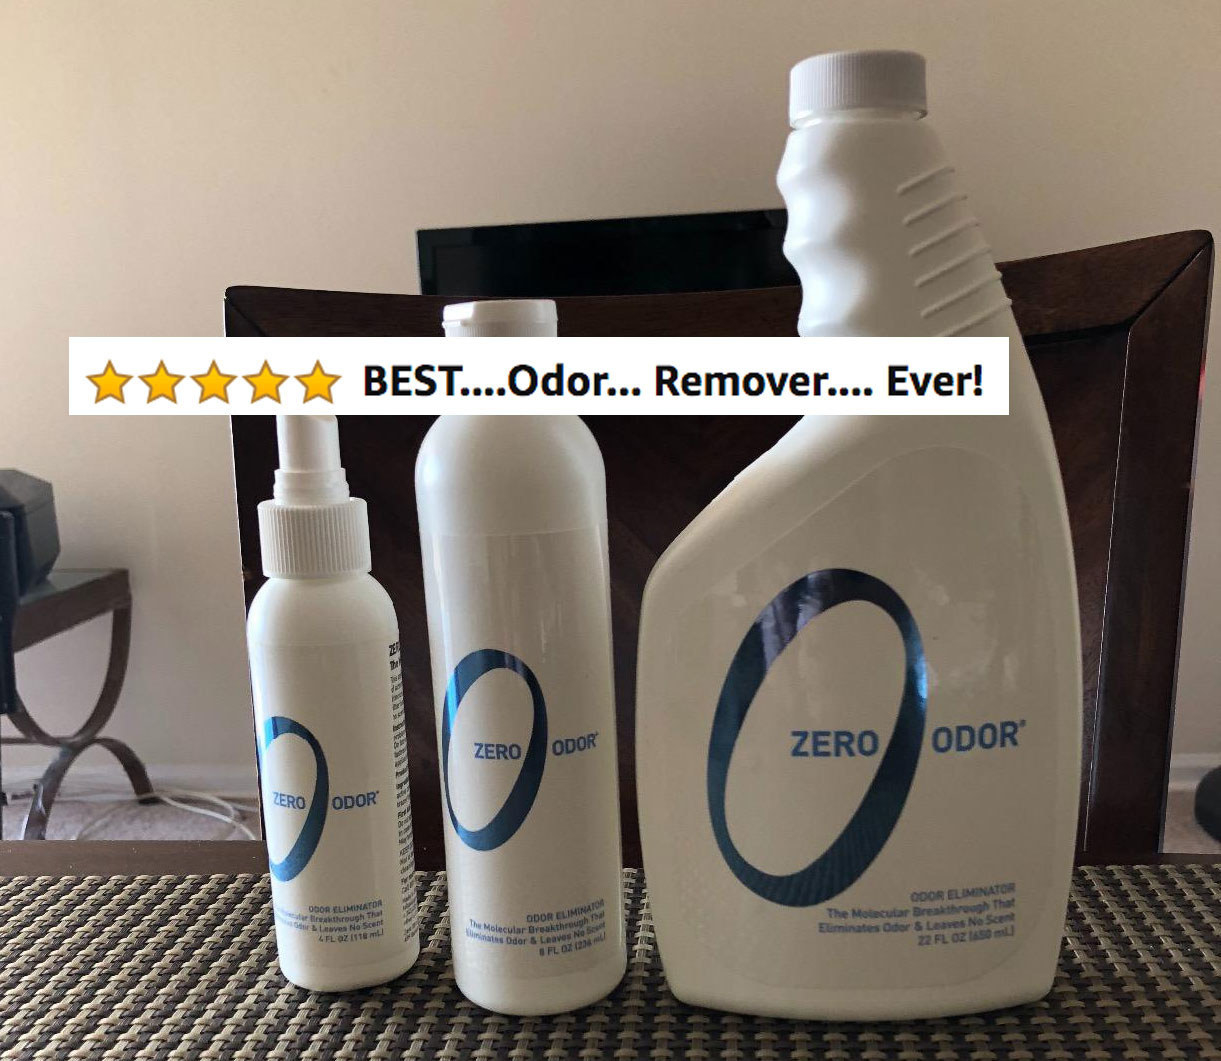 The three bottles with five stars and text 